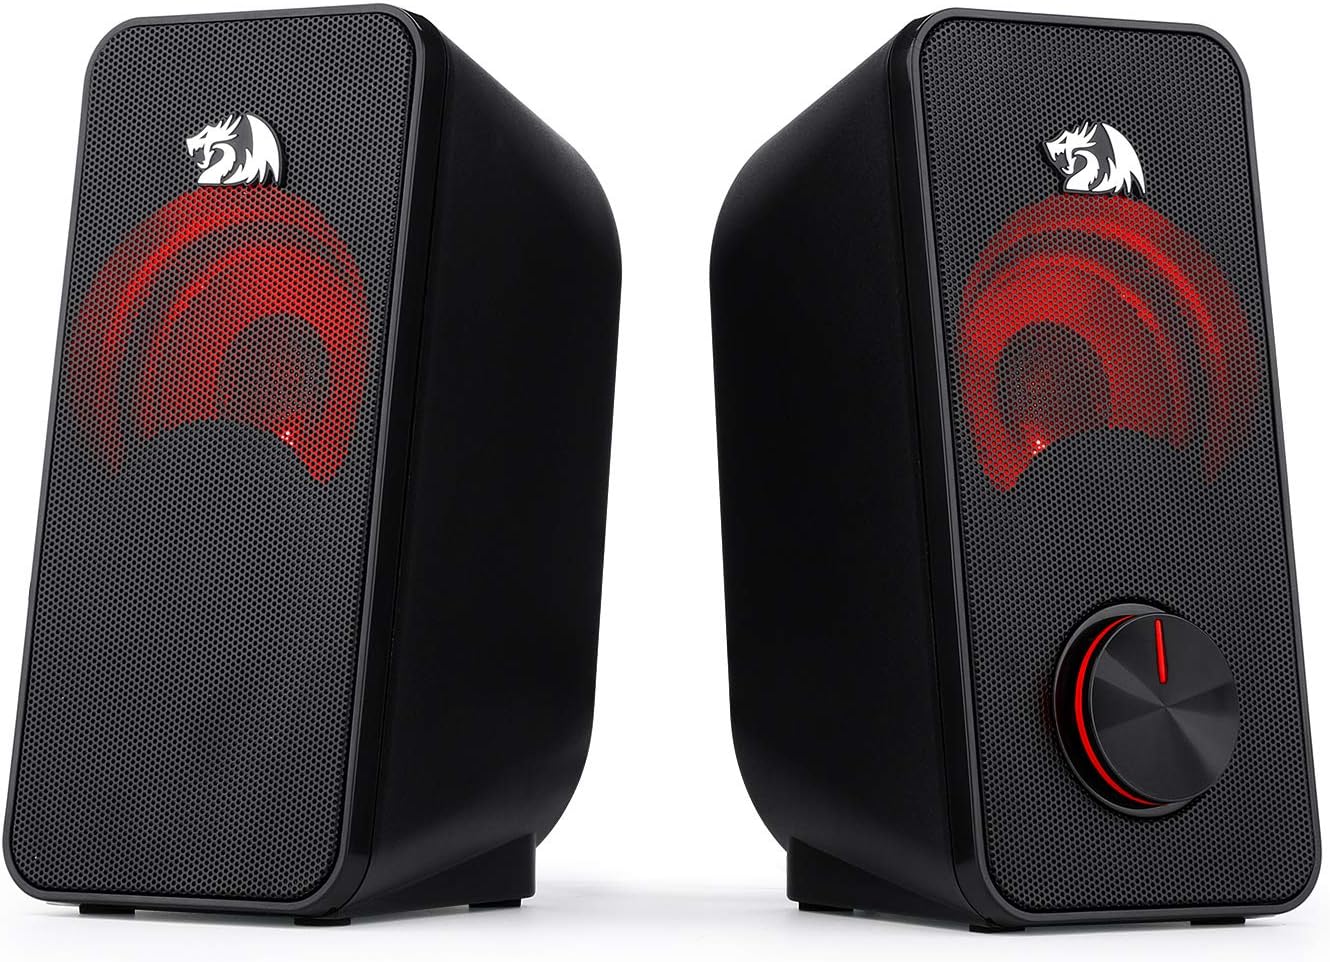 Redragon GS500 Stentor PC Gaming Speaker, 2.0 Channel Stereo Desktop Computer Speaker with Red Backlight, Quality Bass and Crystal Clear Sound, USB Powered with a 3.5mm Connector